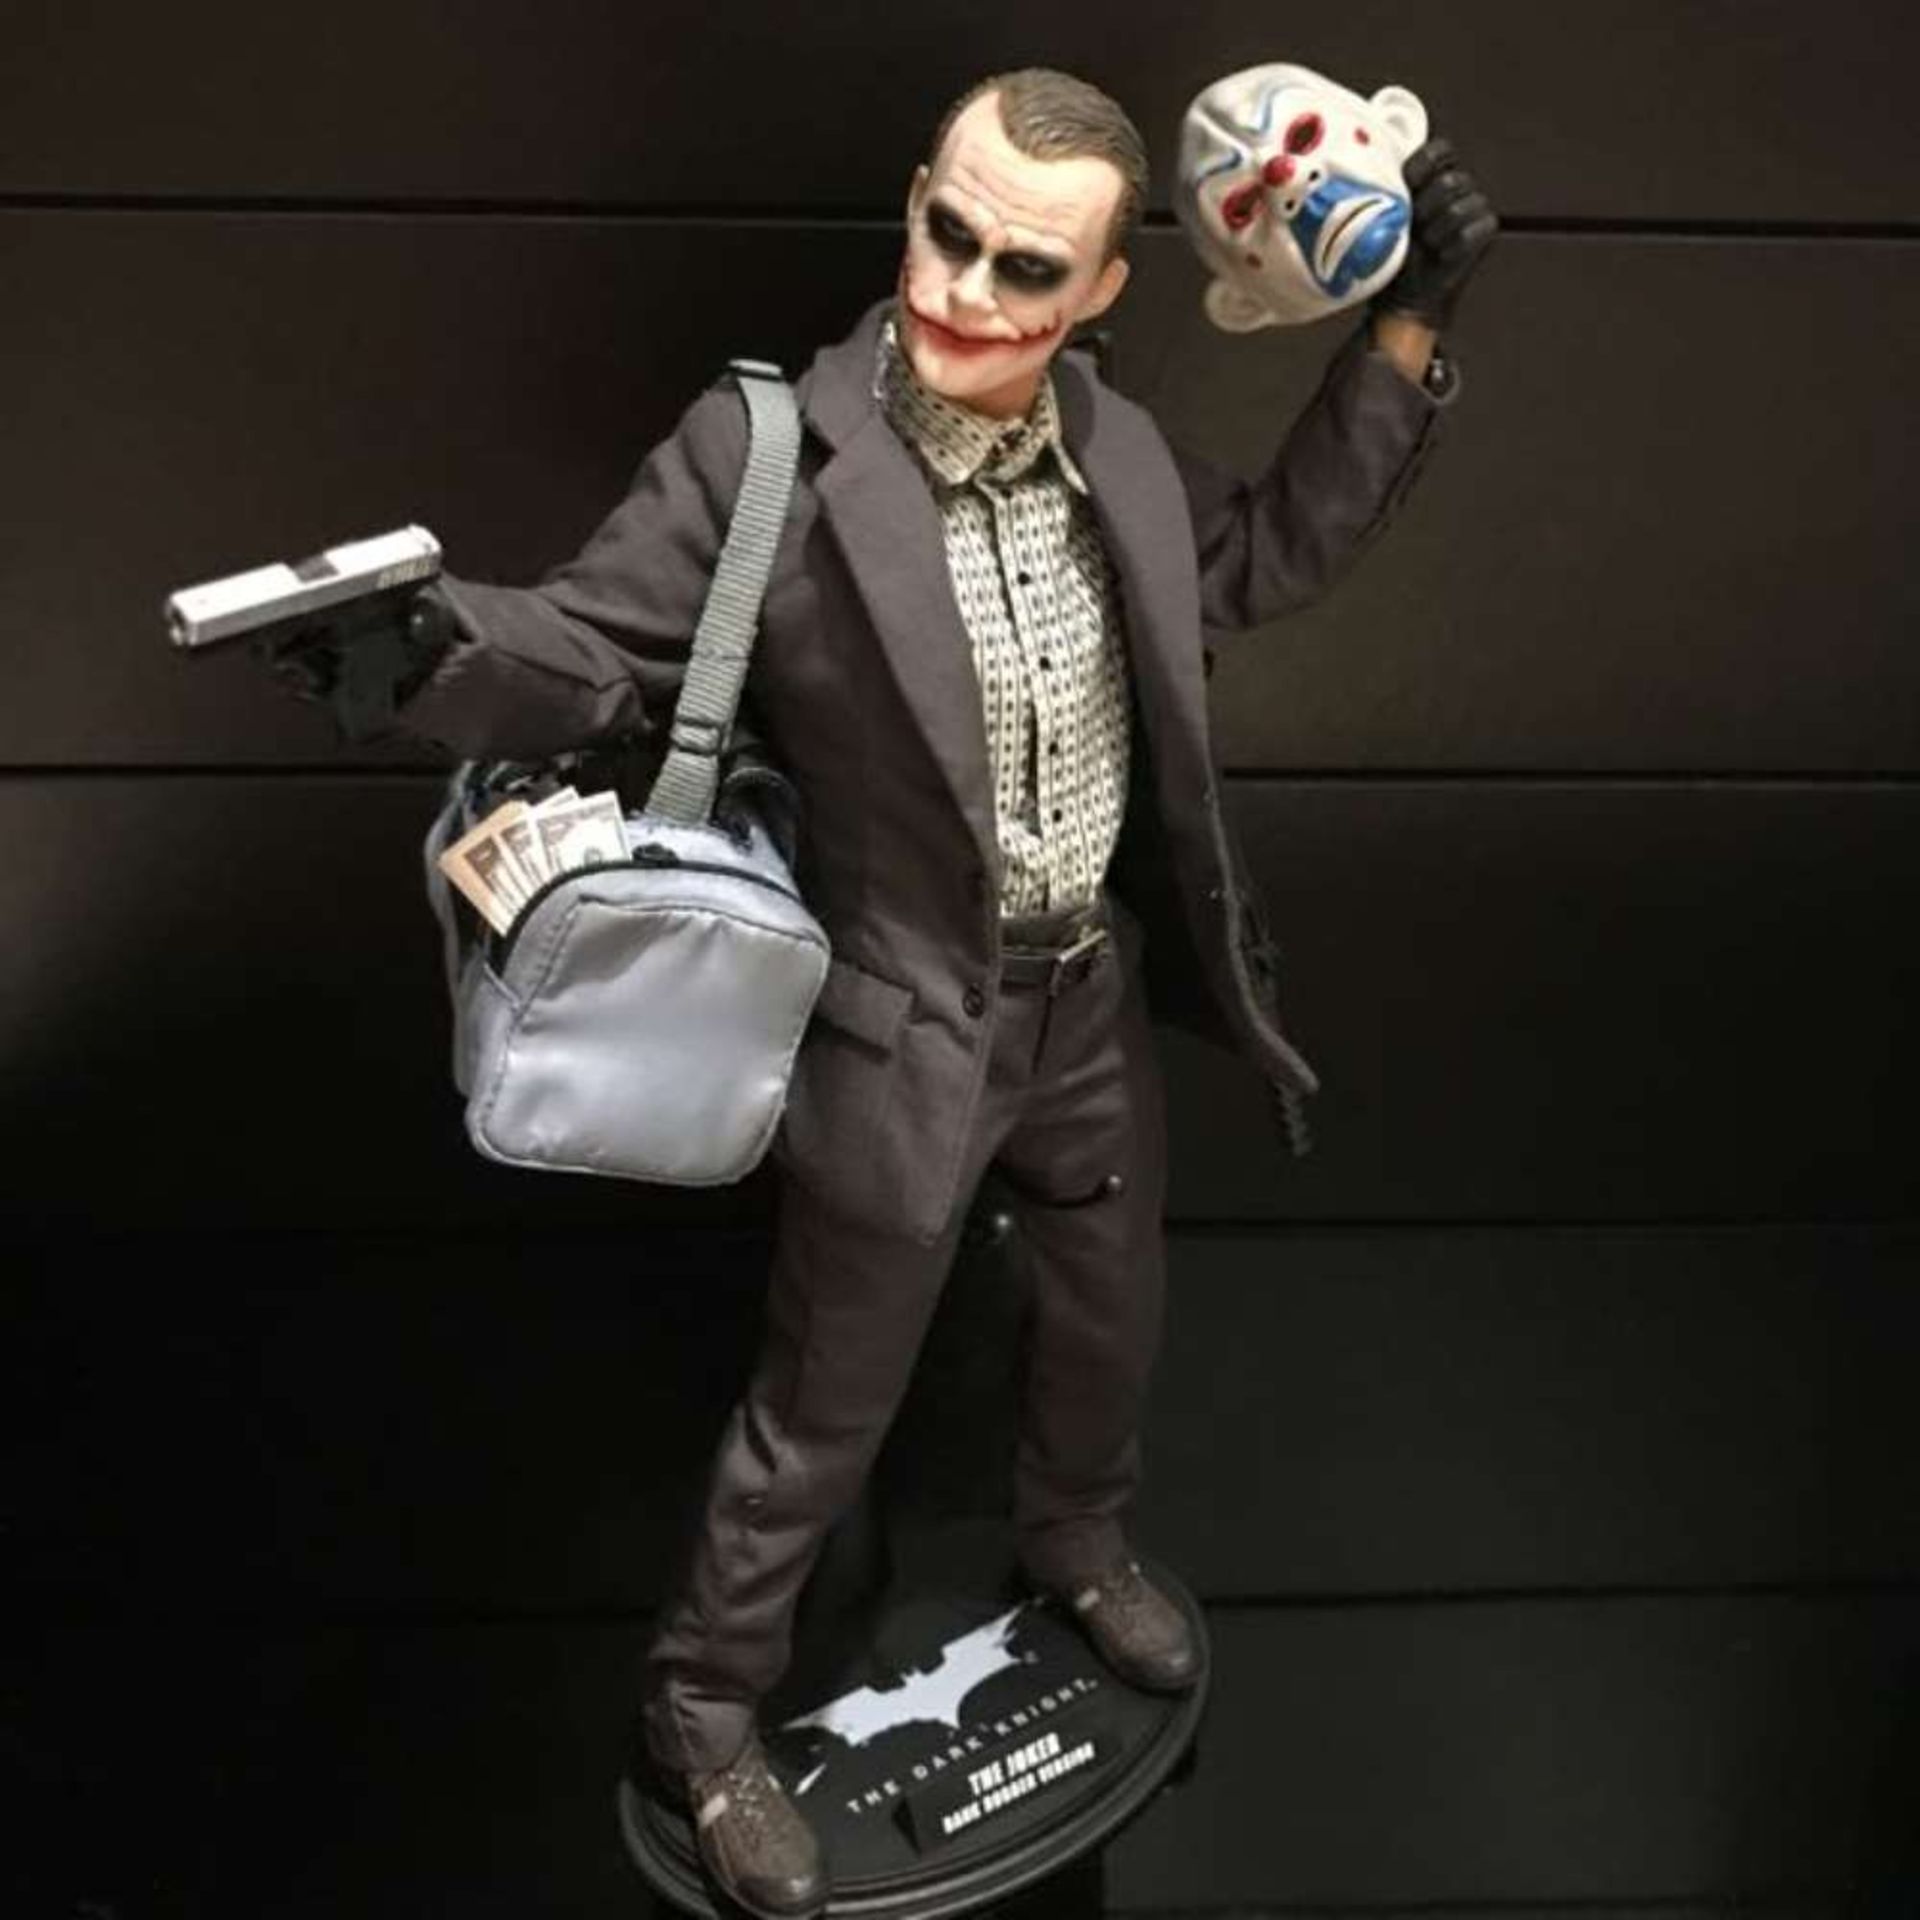 Hot Toys "The Joker" Bank Robber Edition 1/6 Scale Figure - Image 4 of 6